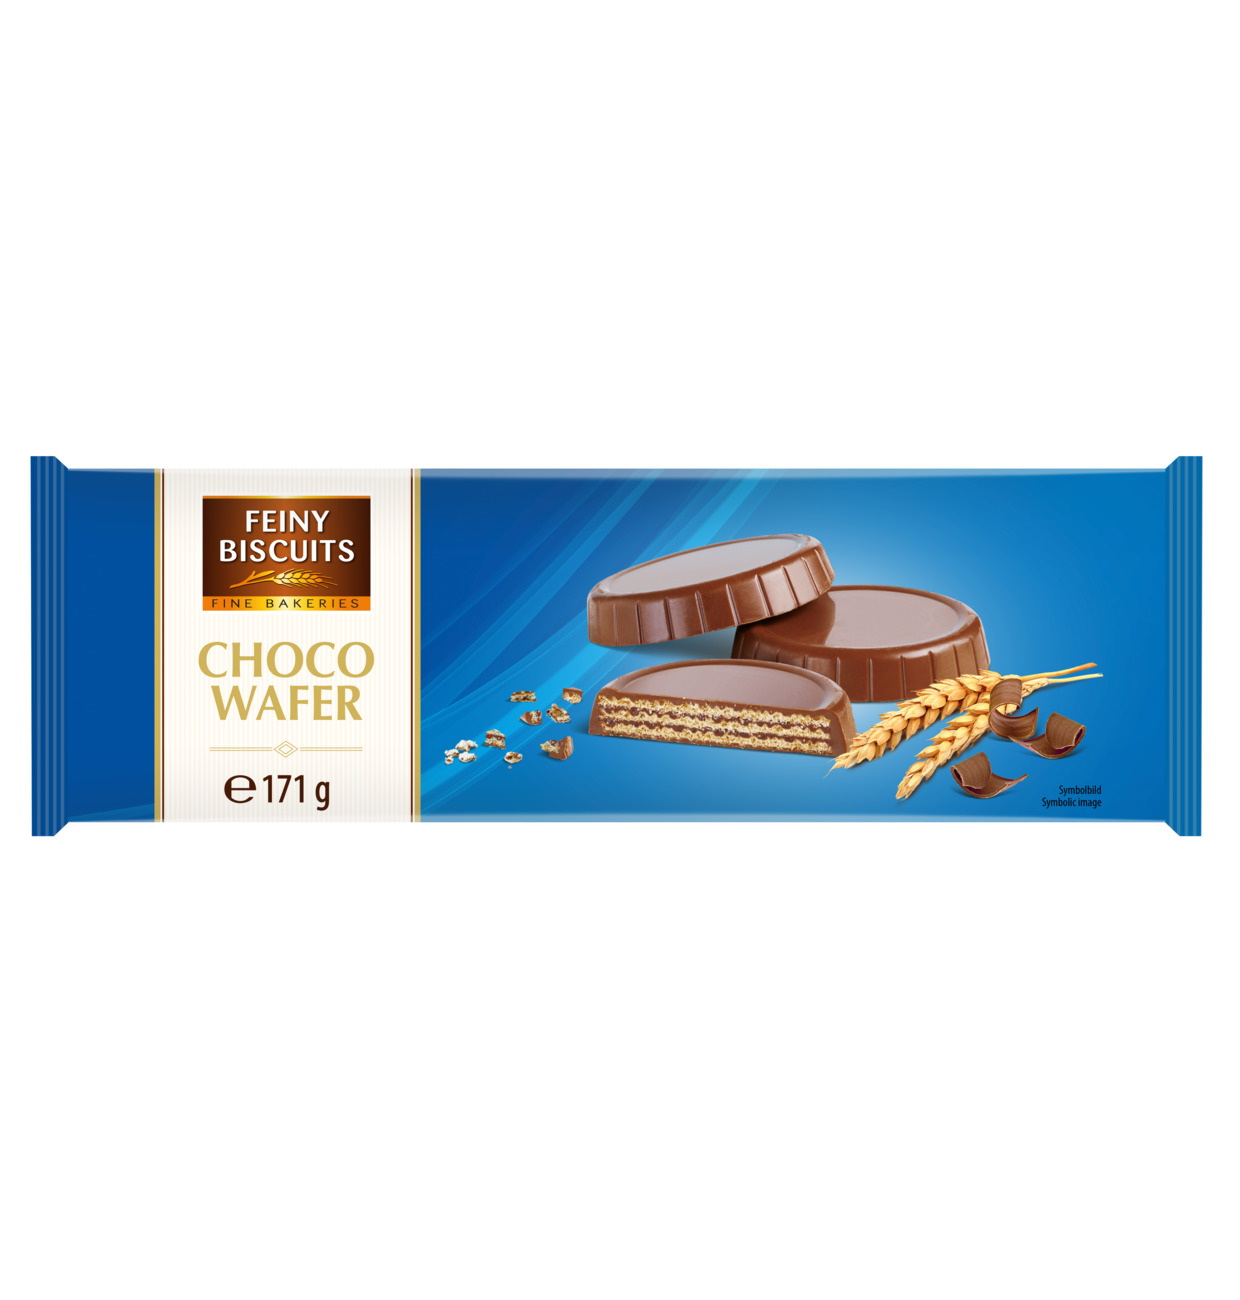 9002859109959 - BISC CHOCO WAFER FEINY BISCUITS 171G